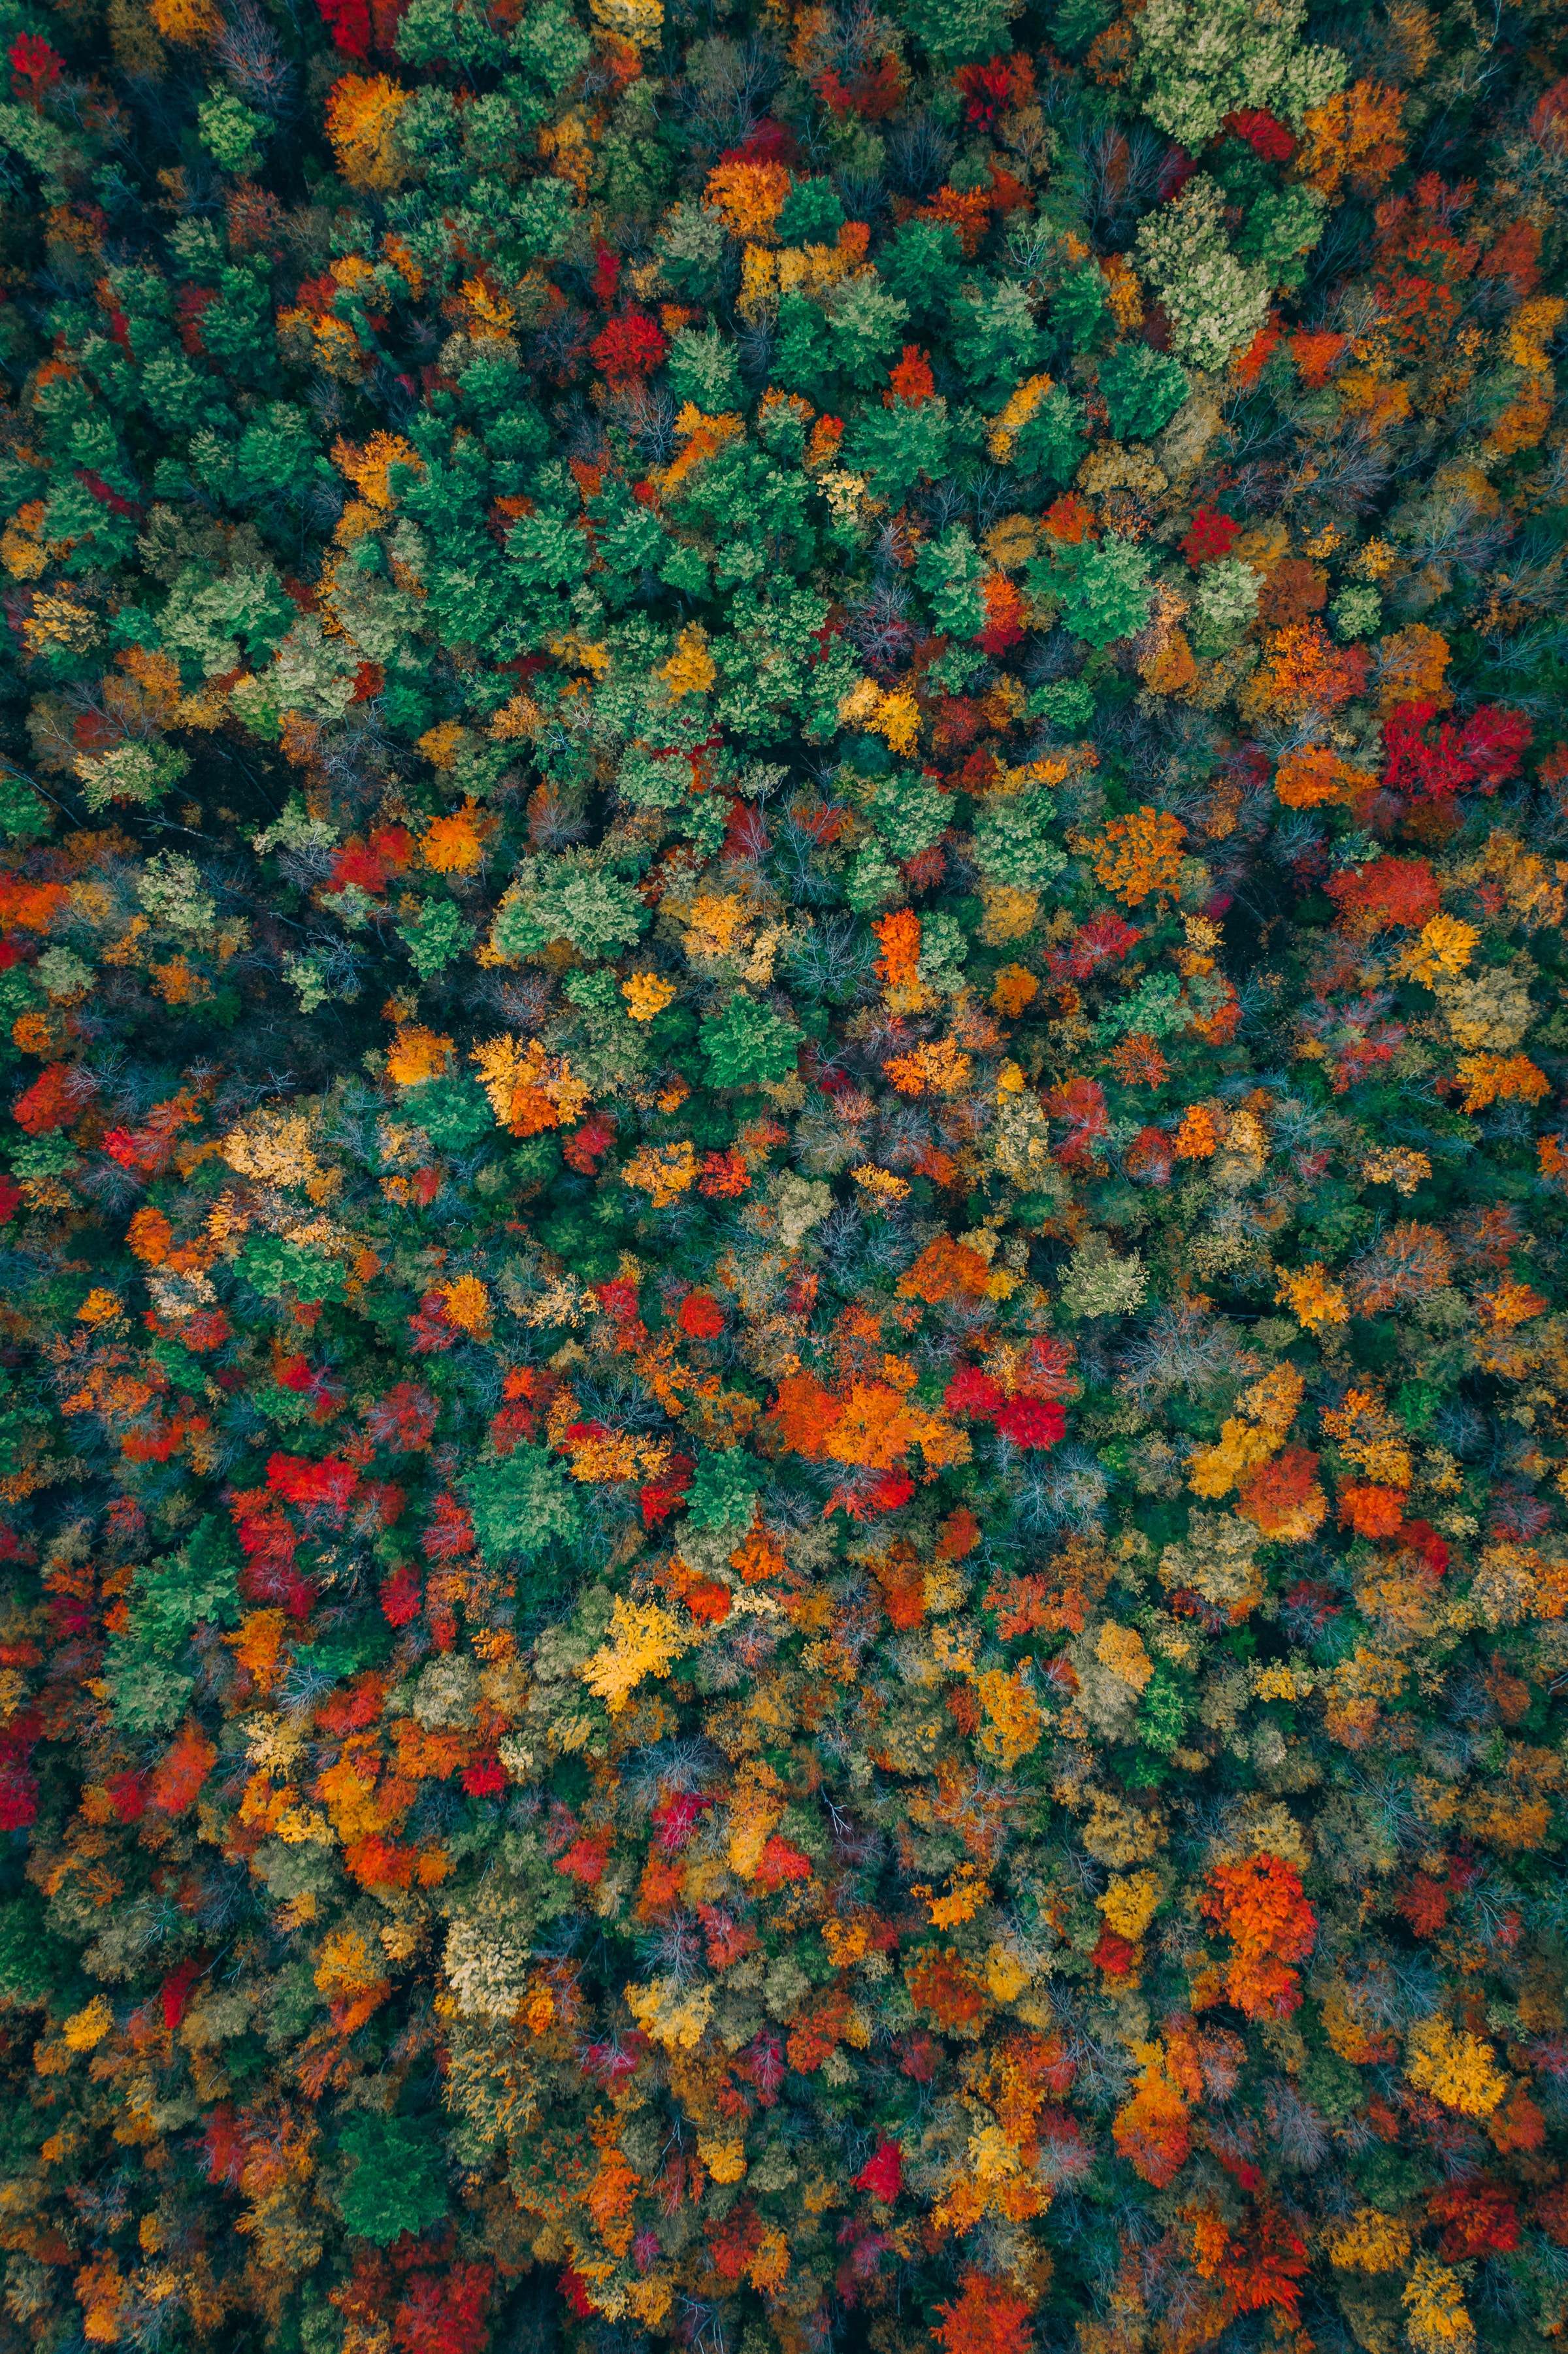 multicolored, motley, view from above, autumn, forest, nature, trees